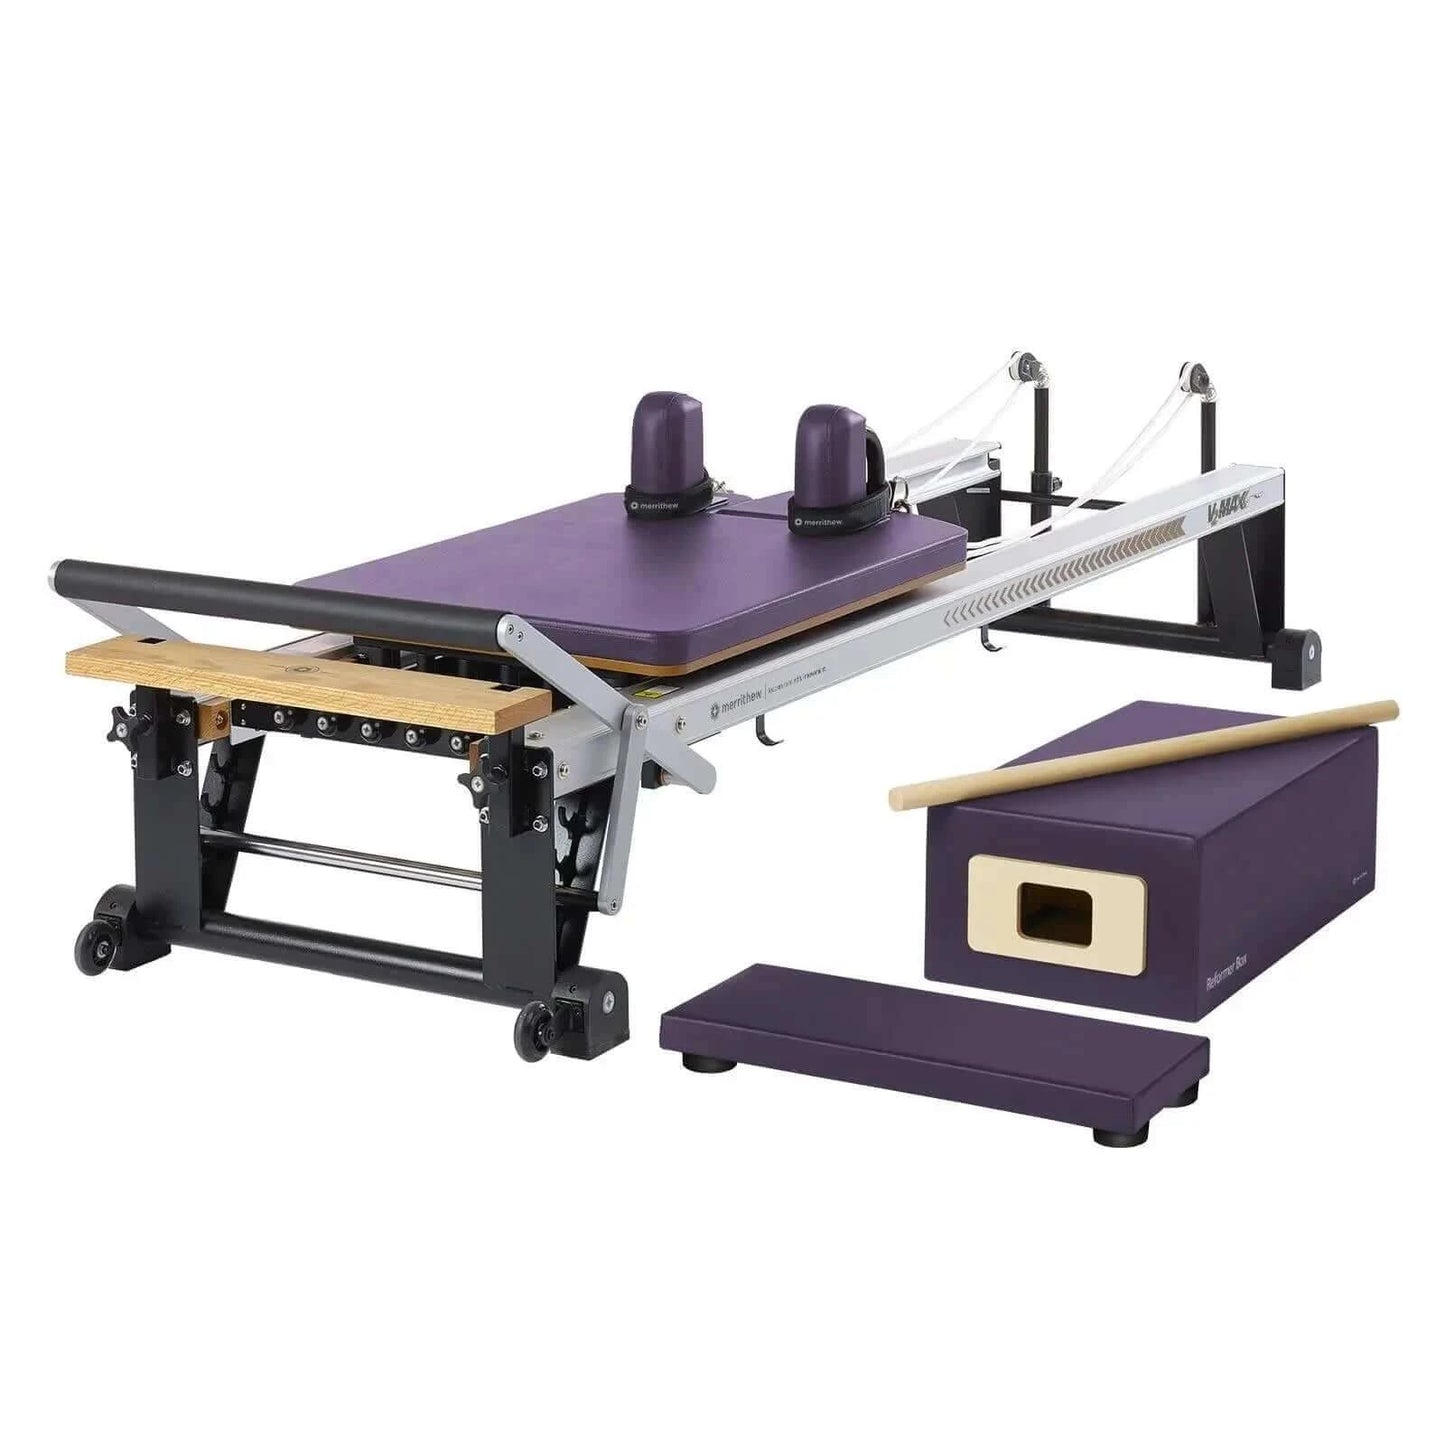 Purple Impulse Merrithew™ Pilates At Home V2 Max™ Reformer Package by Merrithew™ sold by Pilates Matters® by BSP LLC